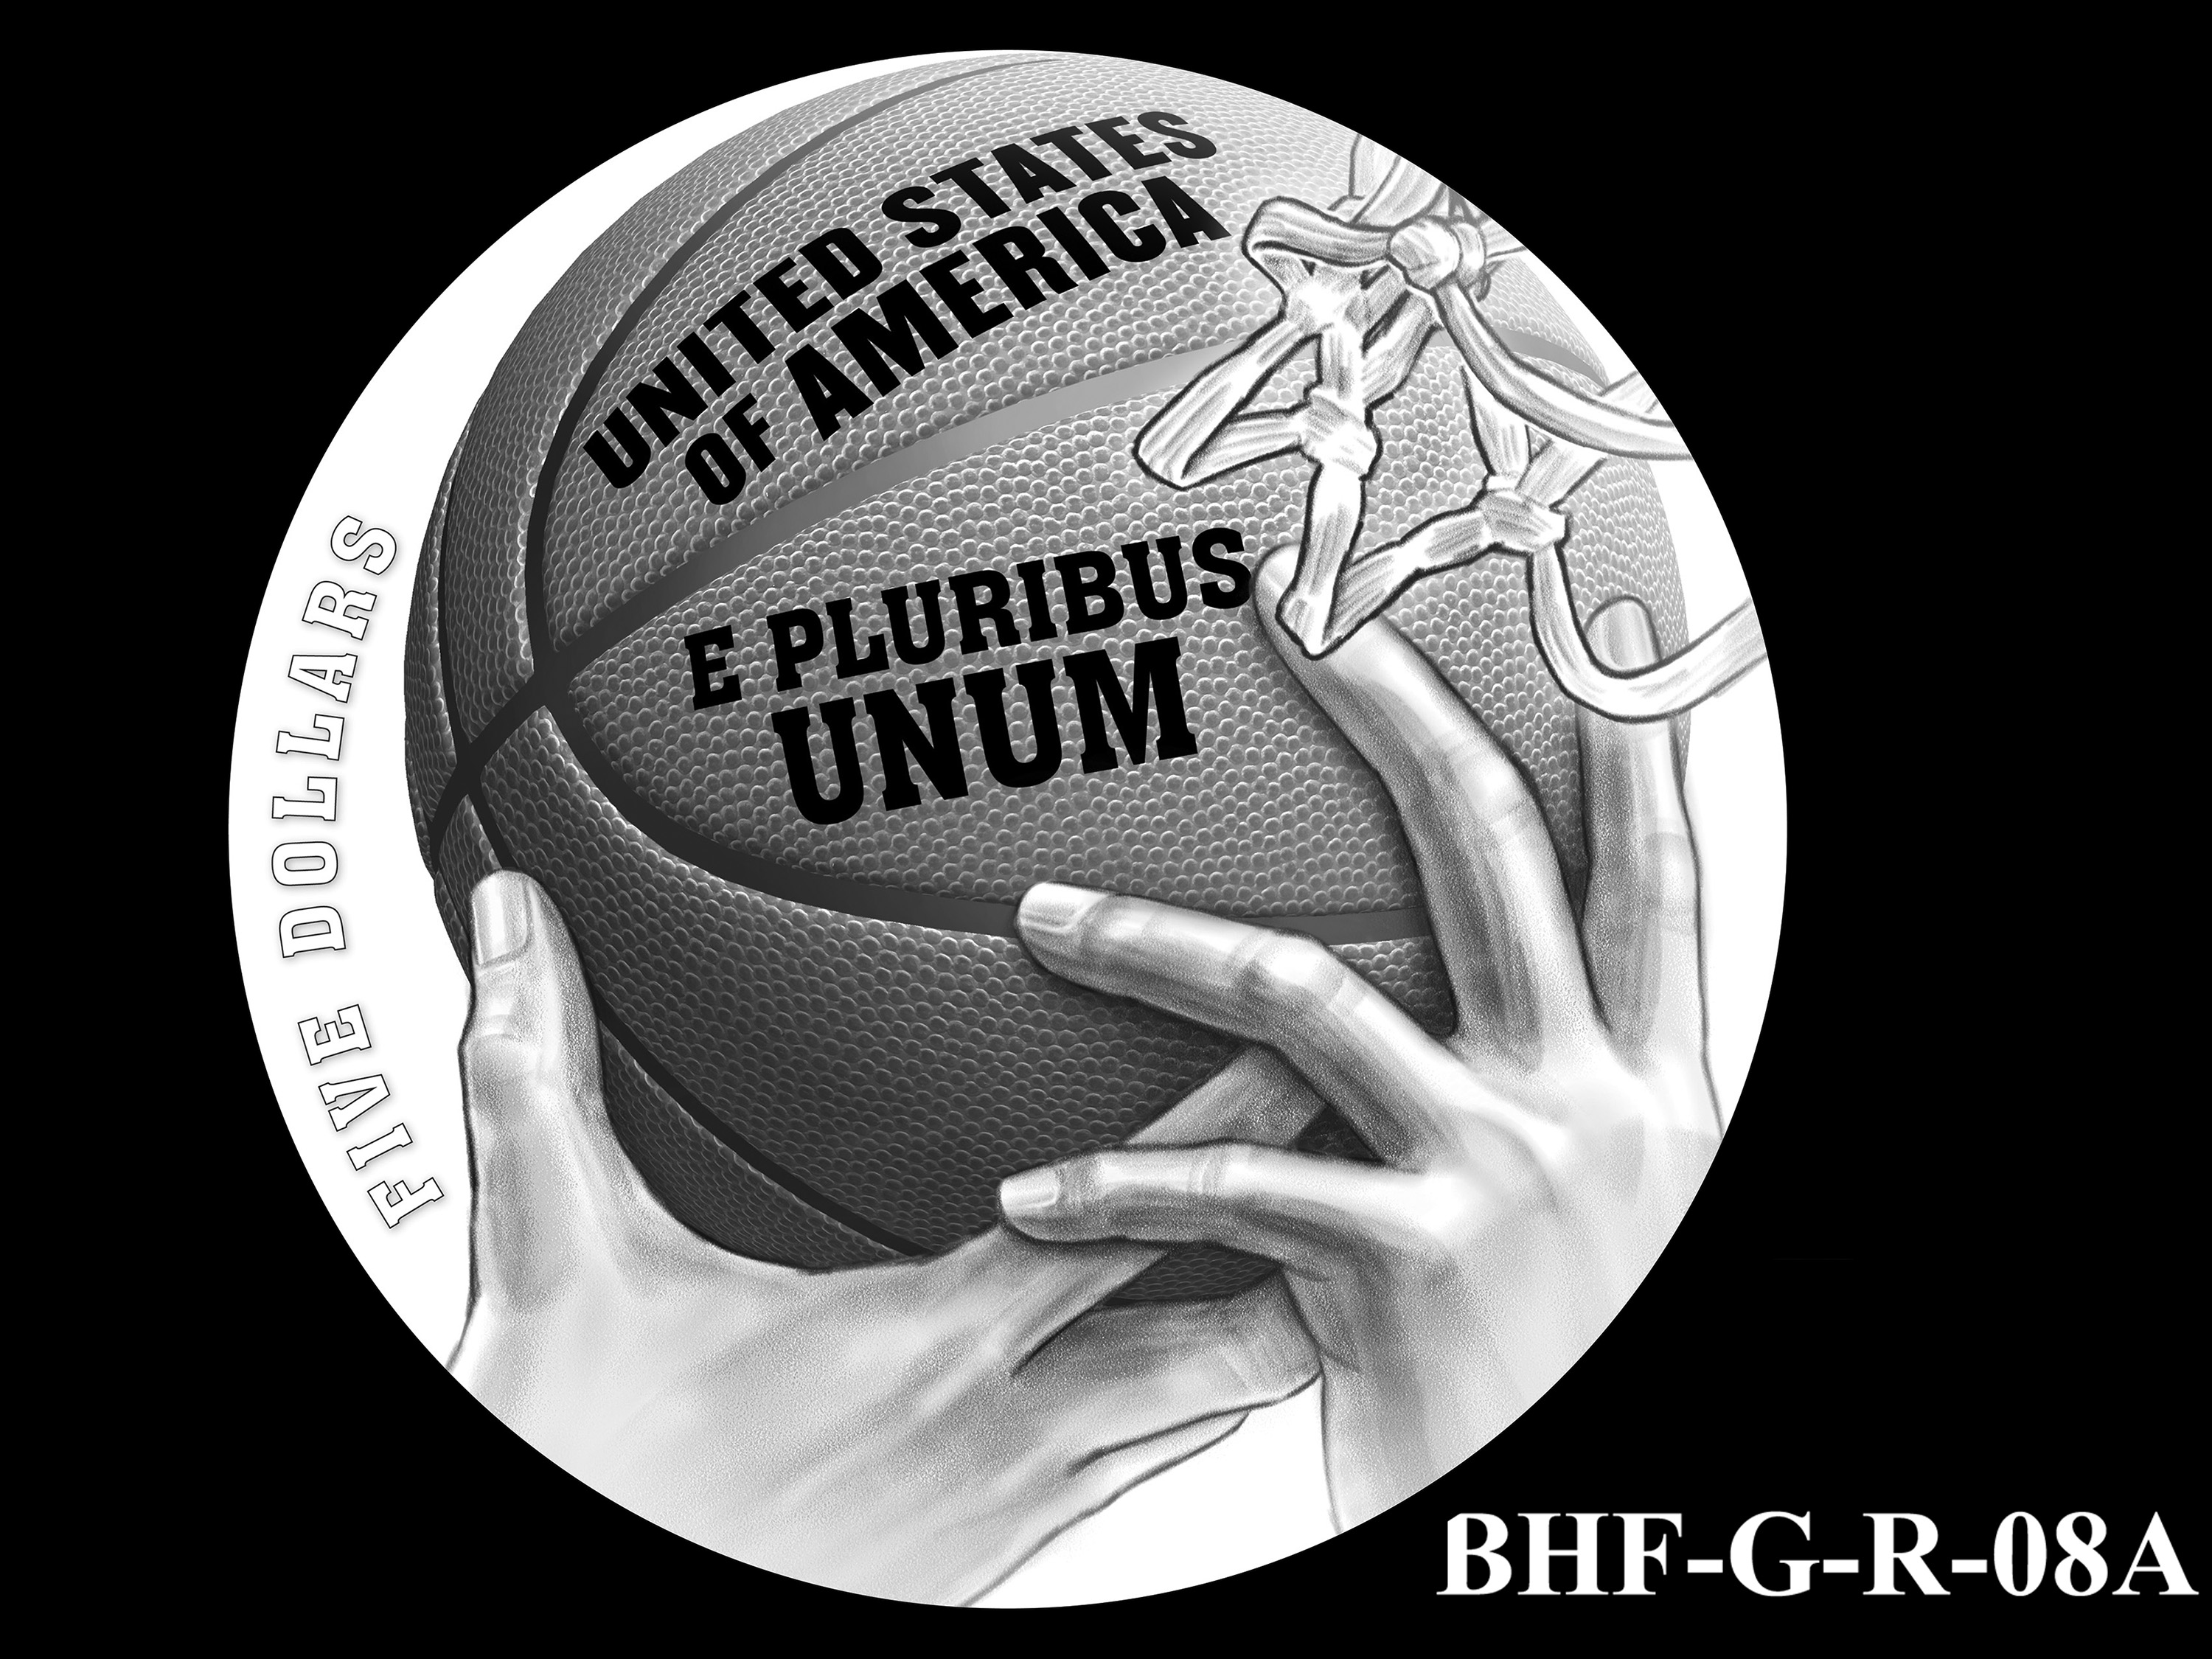 BHF-G-R-08A -- 2020 Basketball Hall of Fame Commemorative Coin Program - Gold Reverse